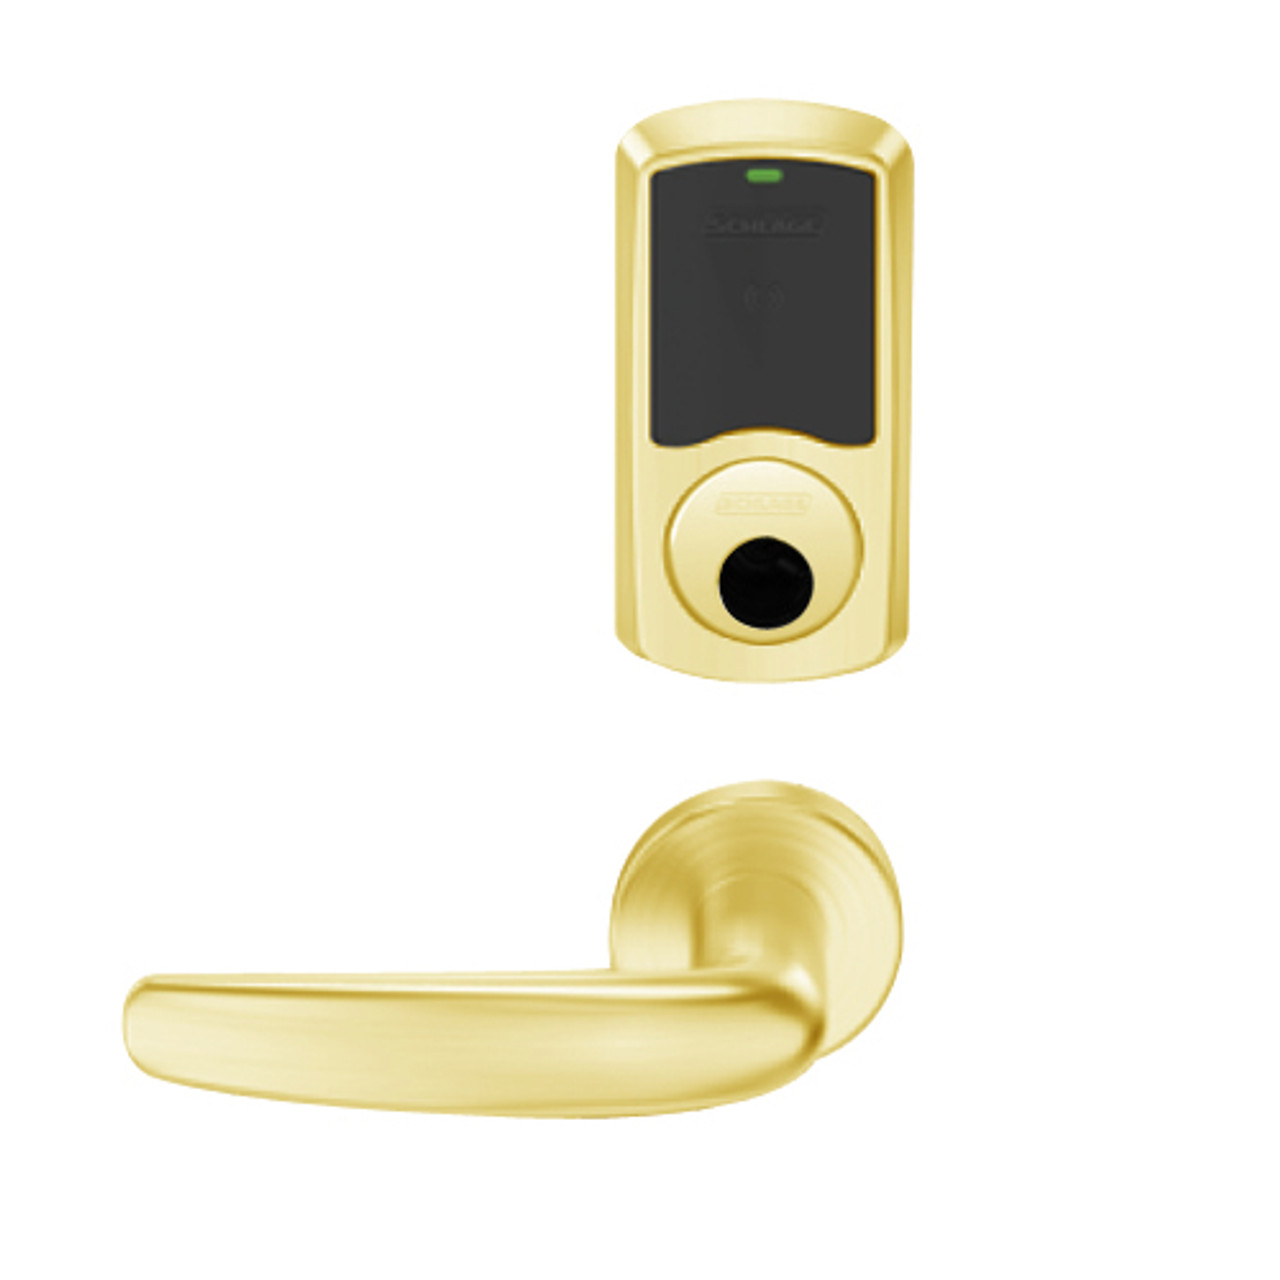 LEMD-GRW-L-07-605-00B Schlage Less Cylinder Privacy/Apartment Wireless Greenwich Mortise Deadbolt Lock with LED and Athens Lever in Bright Brass